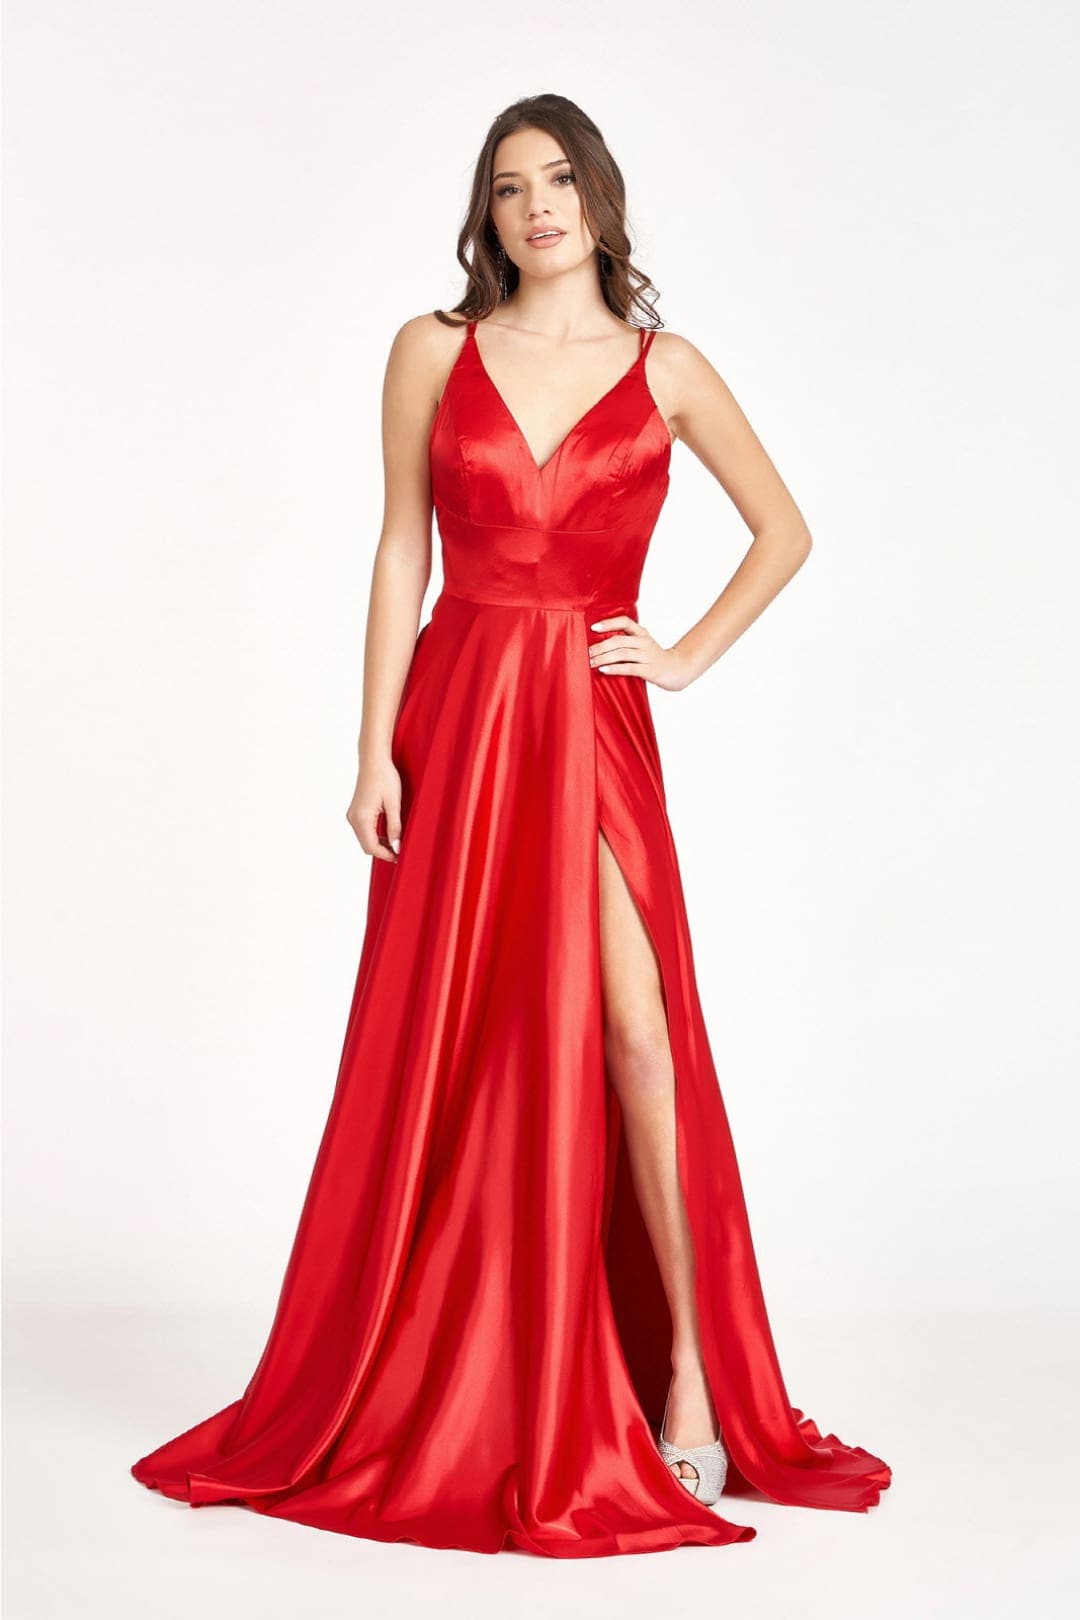 A-line Satin Long Evening Gown - RED / XS